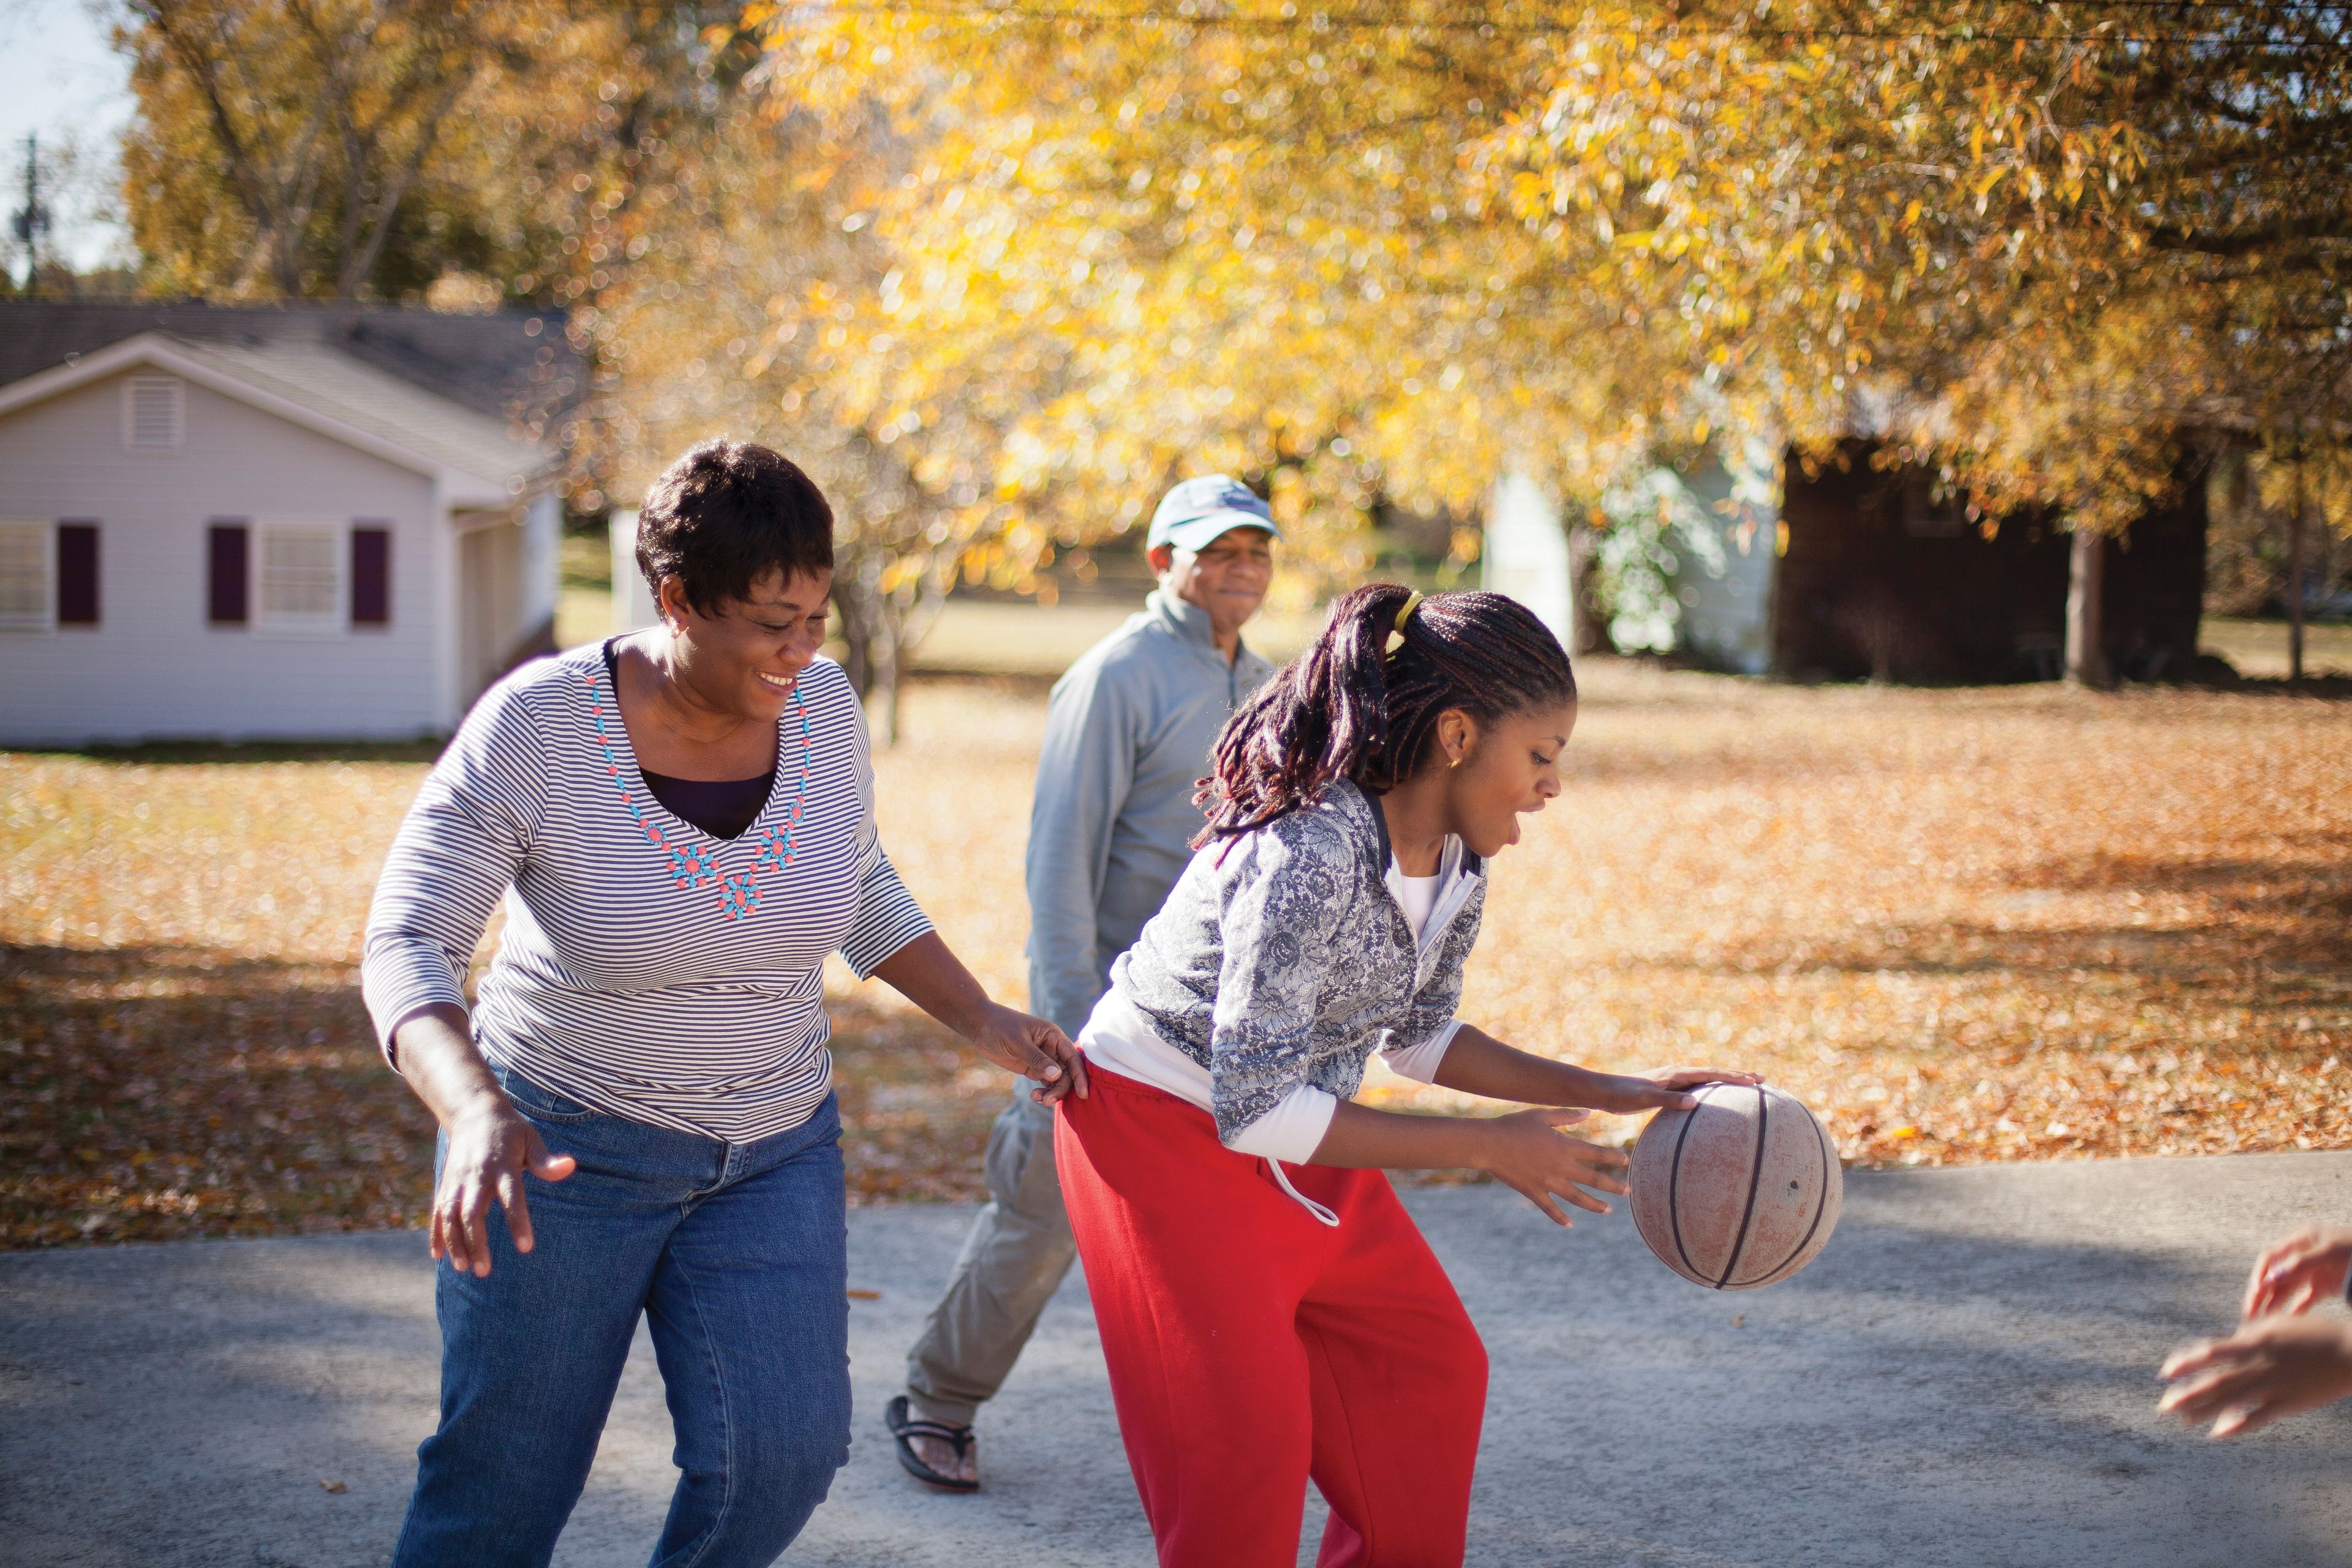 A family plays basketball together.